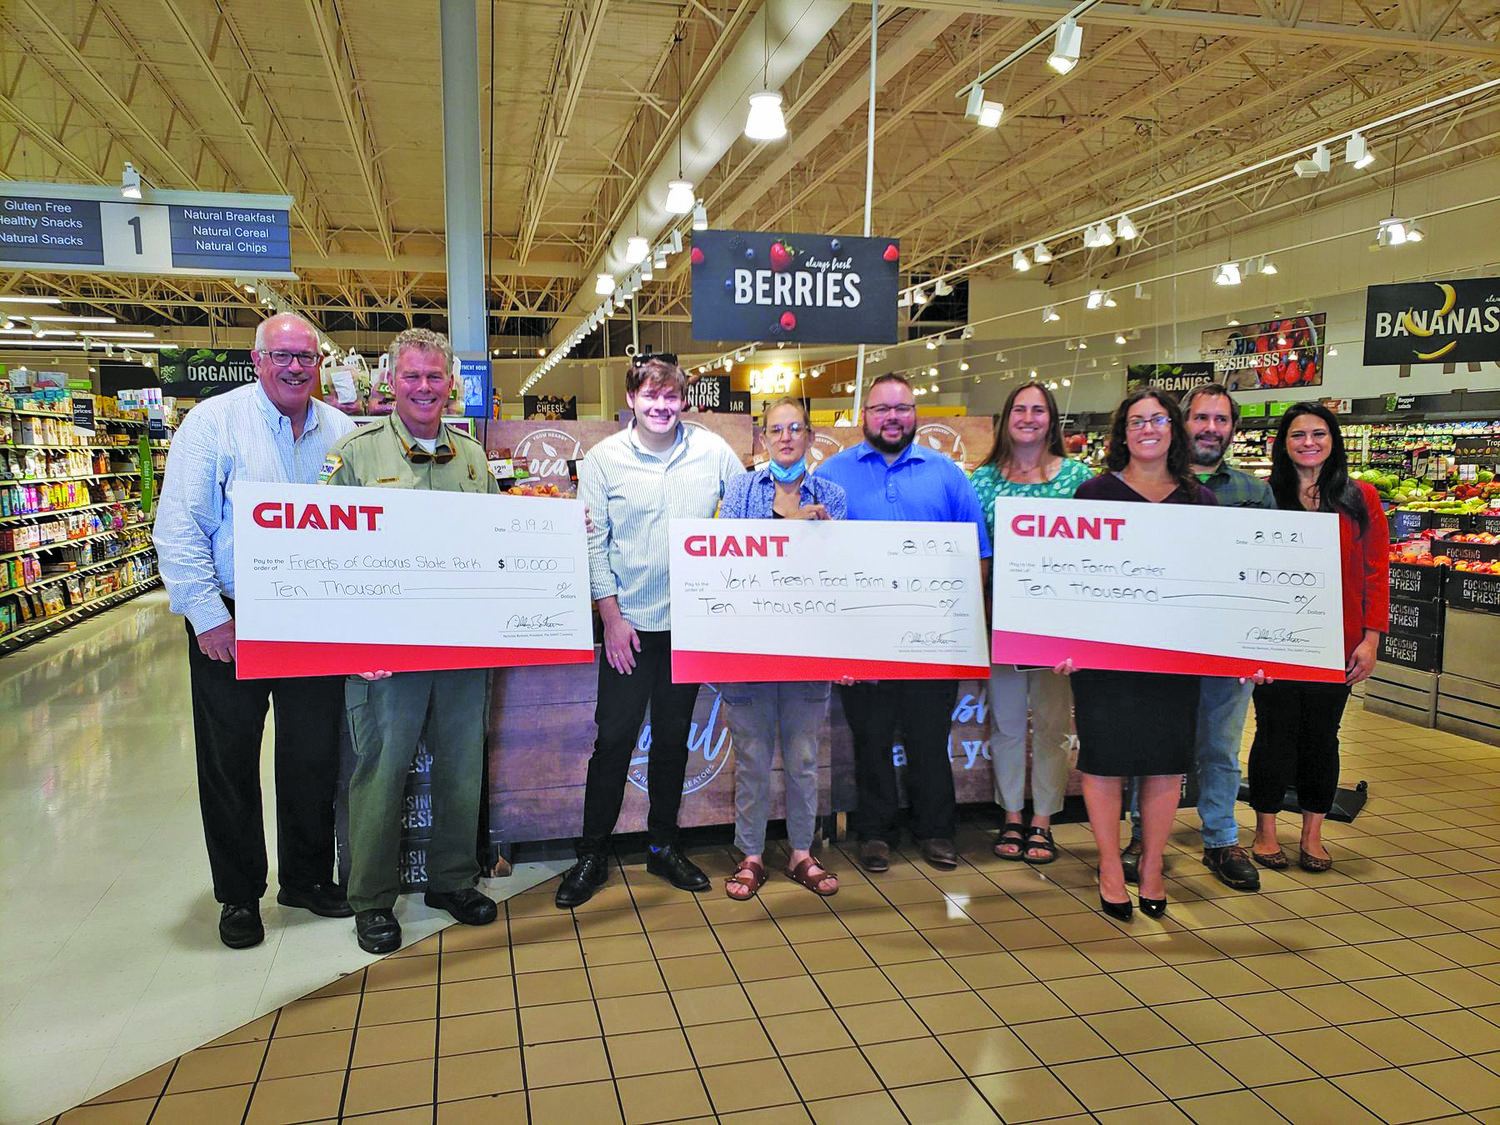 At a Giant store in York, representatives from The Giant Company and Keep Pennsylvania Beautiful were on hand to recognize three of the 42 nonprofits receiving Healing the Planet grants.